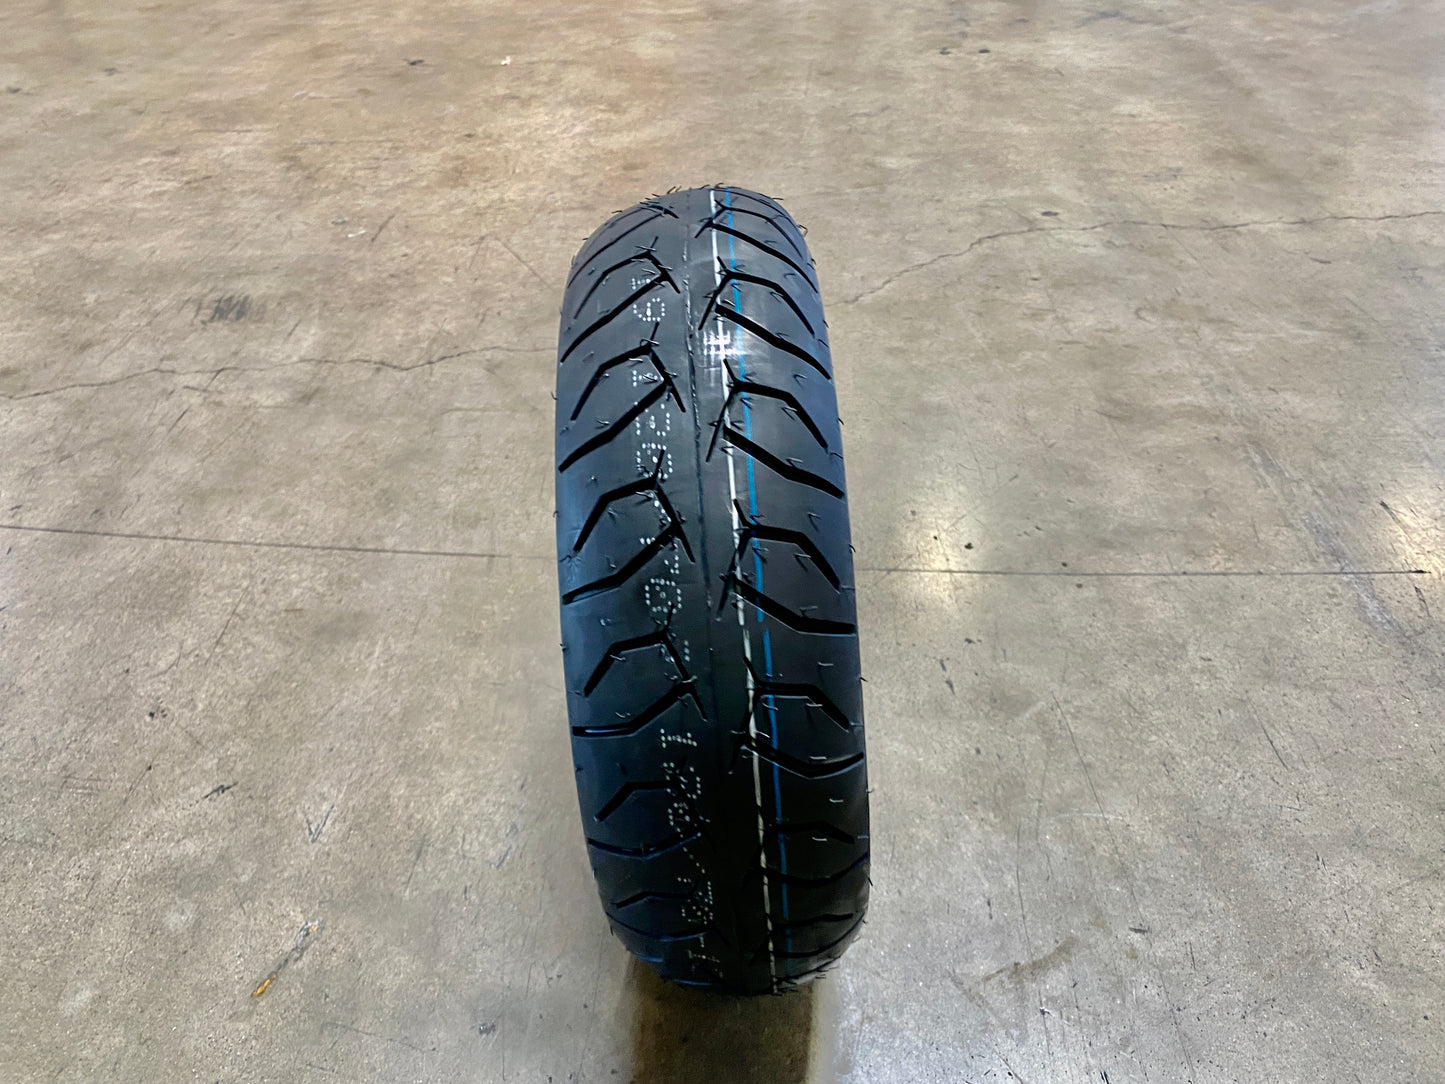 Front tire for BD125-10 vader for sale near me. BD125-10 front tire 120/70-12